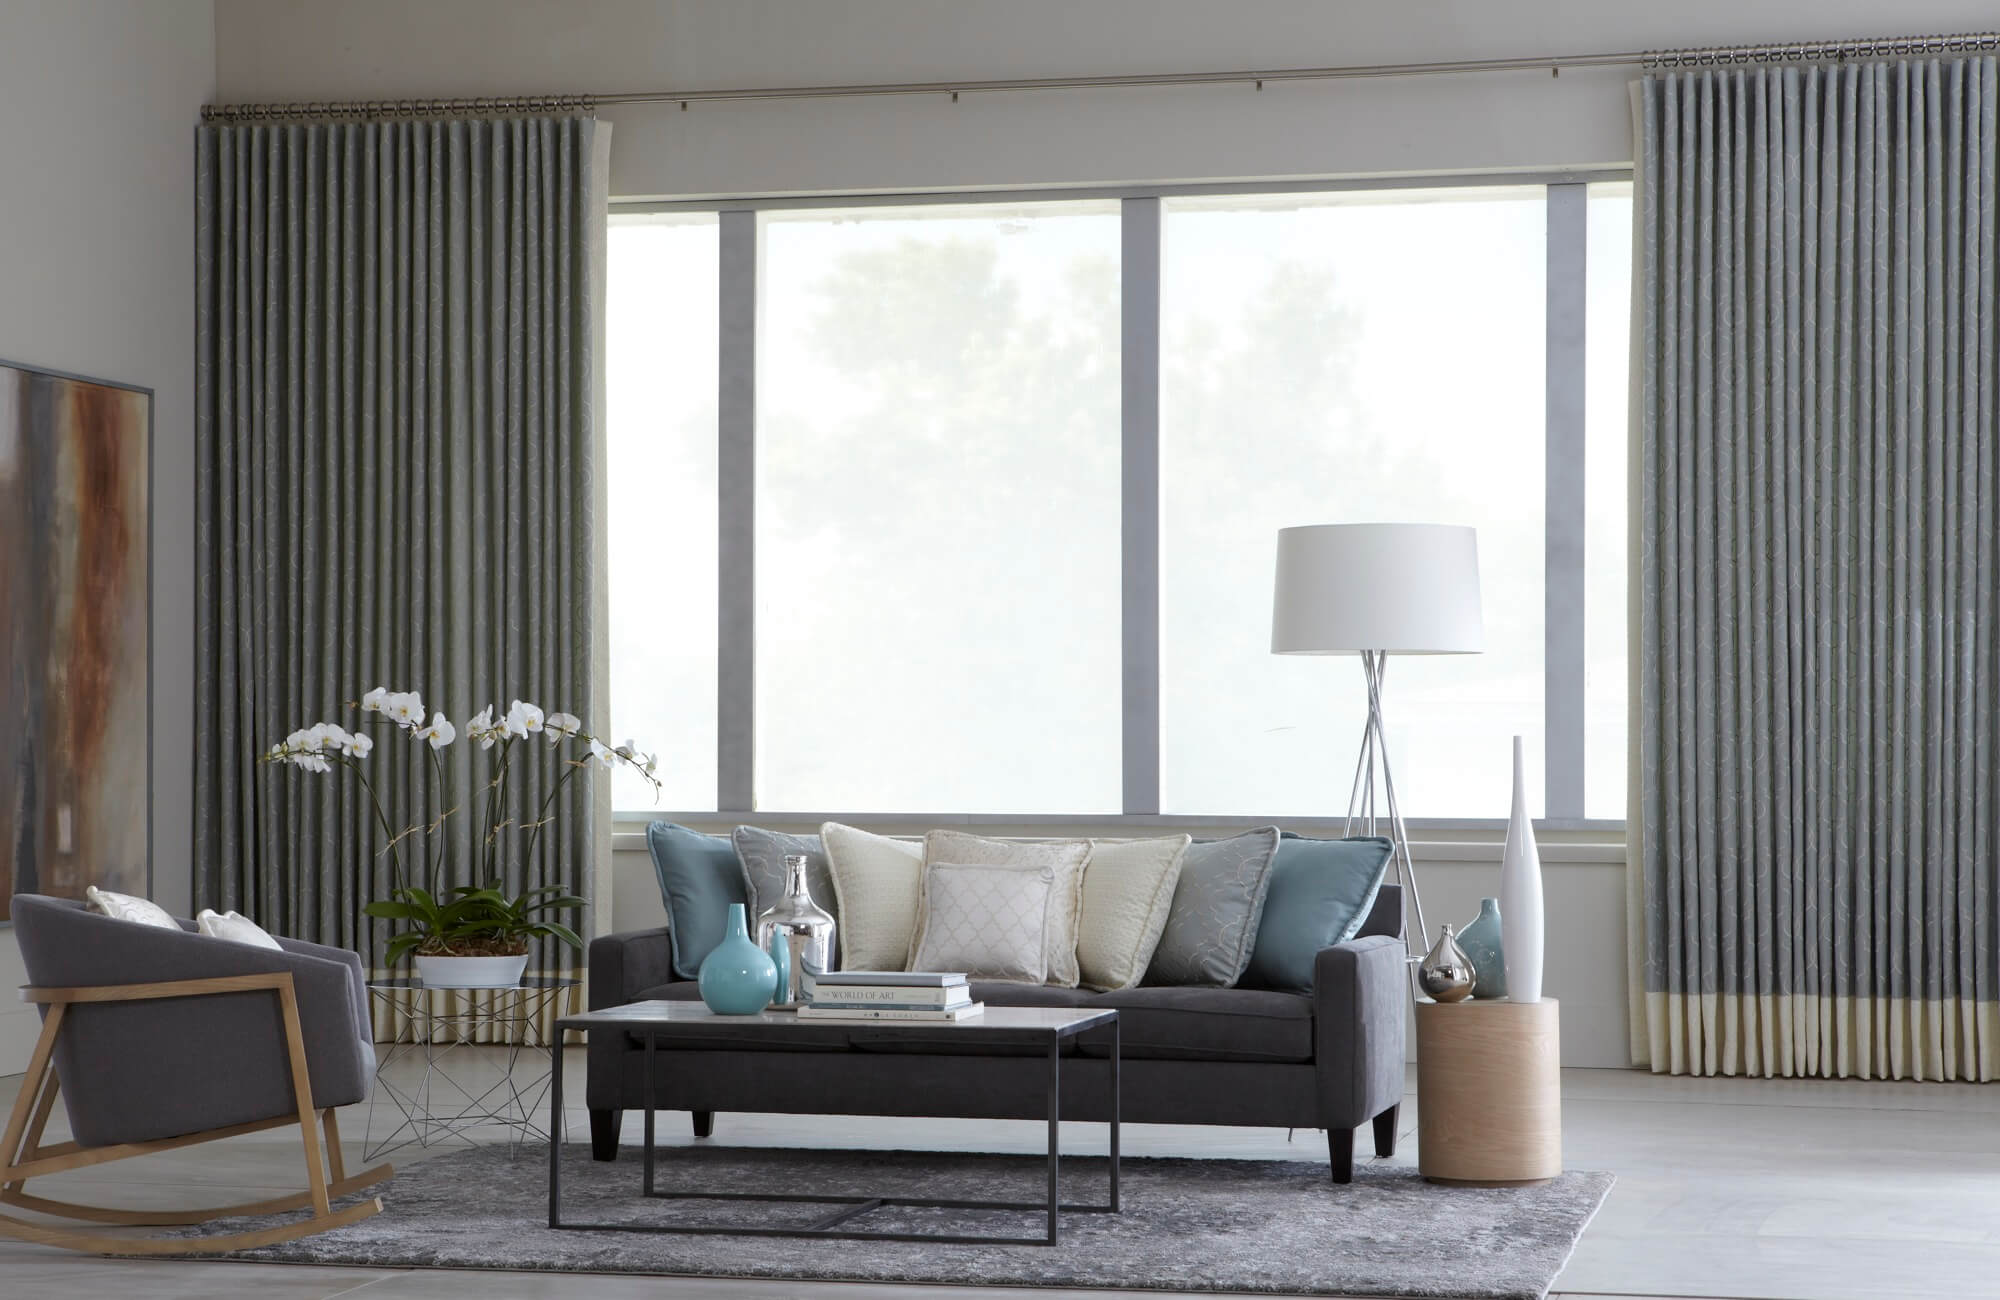 Using heavier and thicker materials for your window treatments can help raise the temperature of your room. 